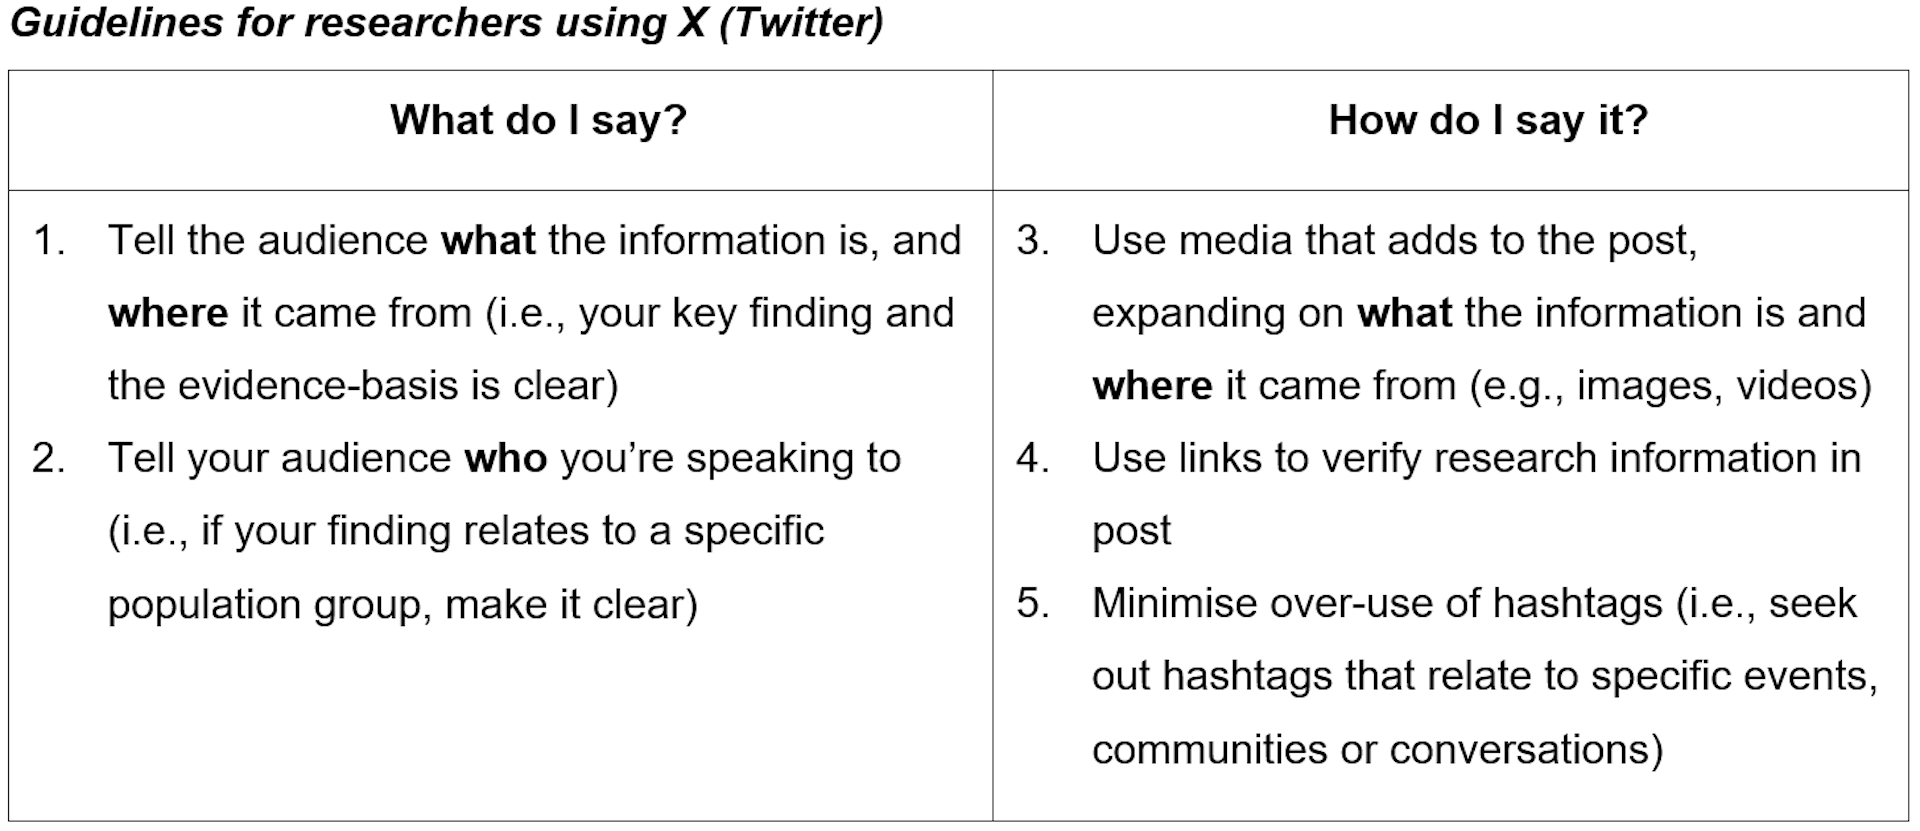 Our guidelines for sharing evidence-based information on X.